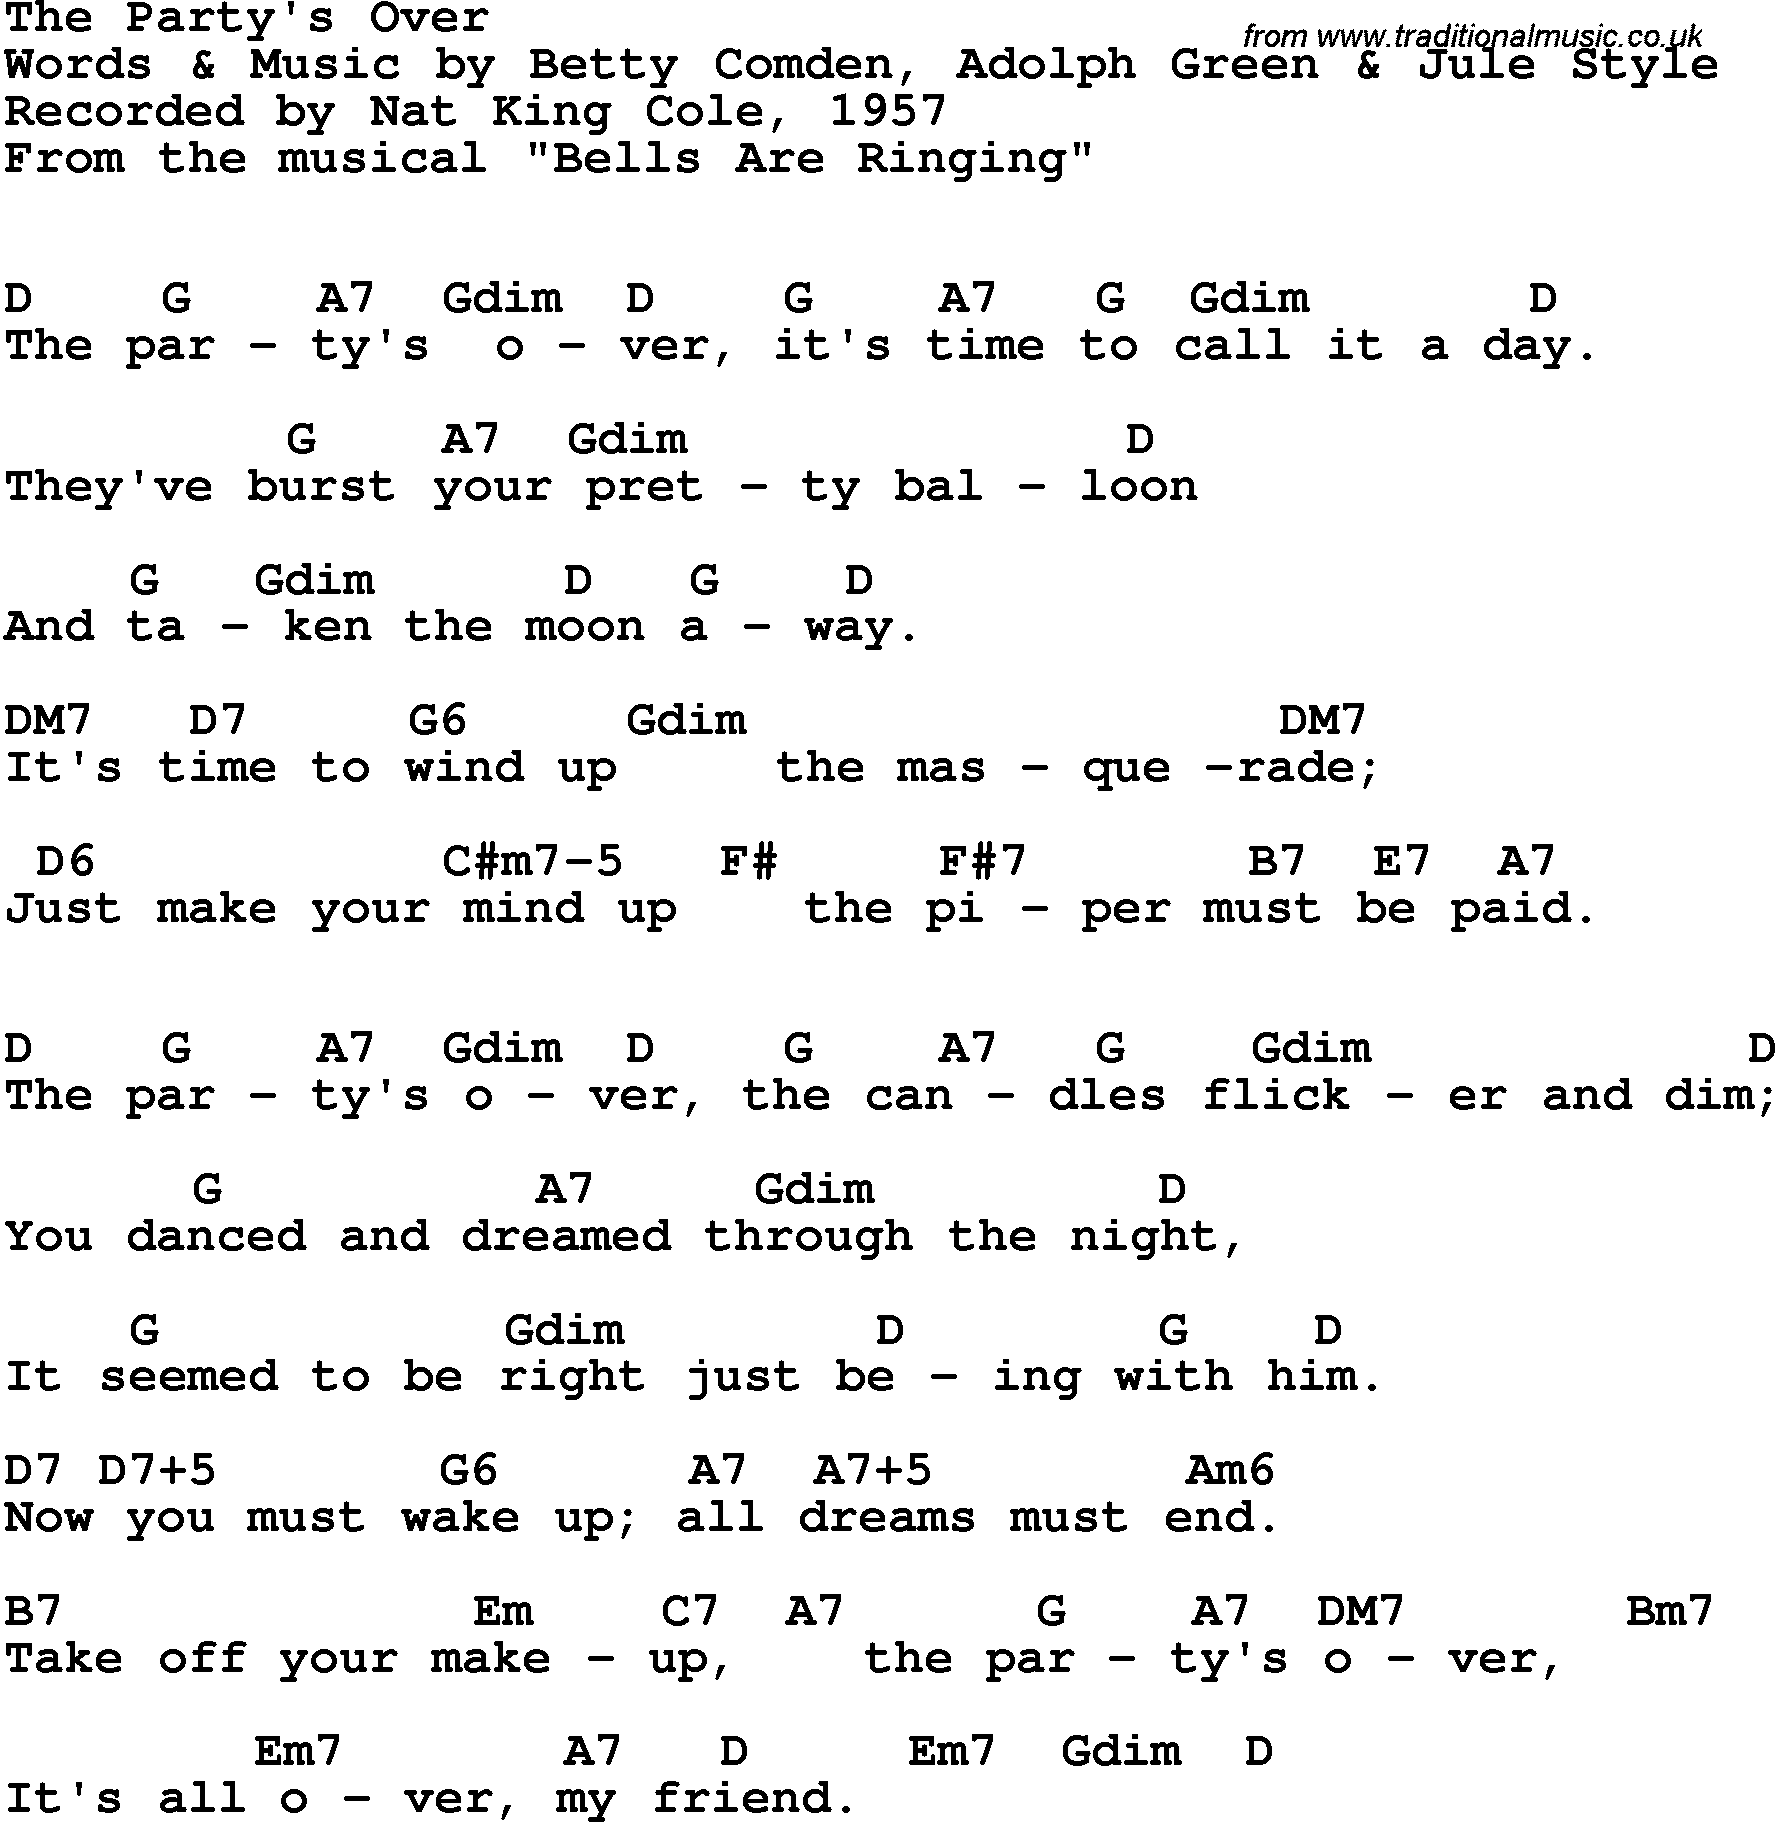 Song Lyrics with guitar chords for Party's Over, The - Nat King Cole, 1957